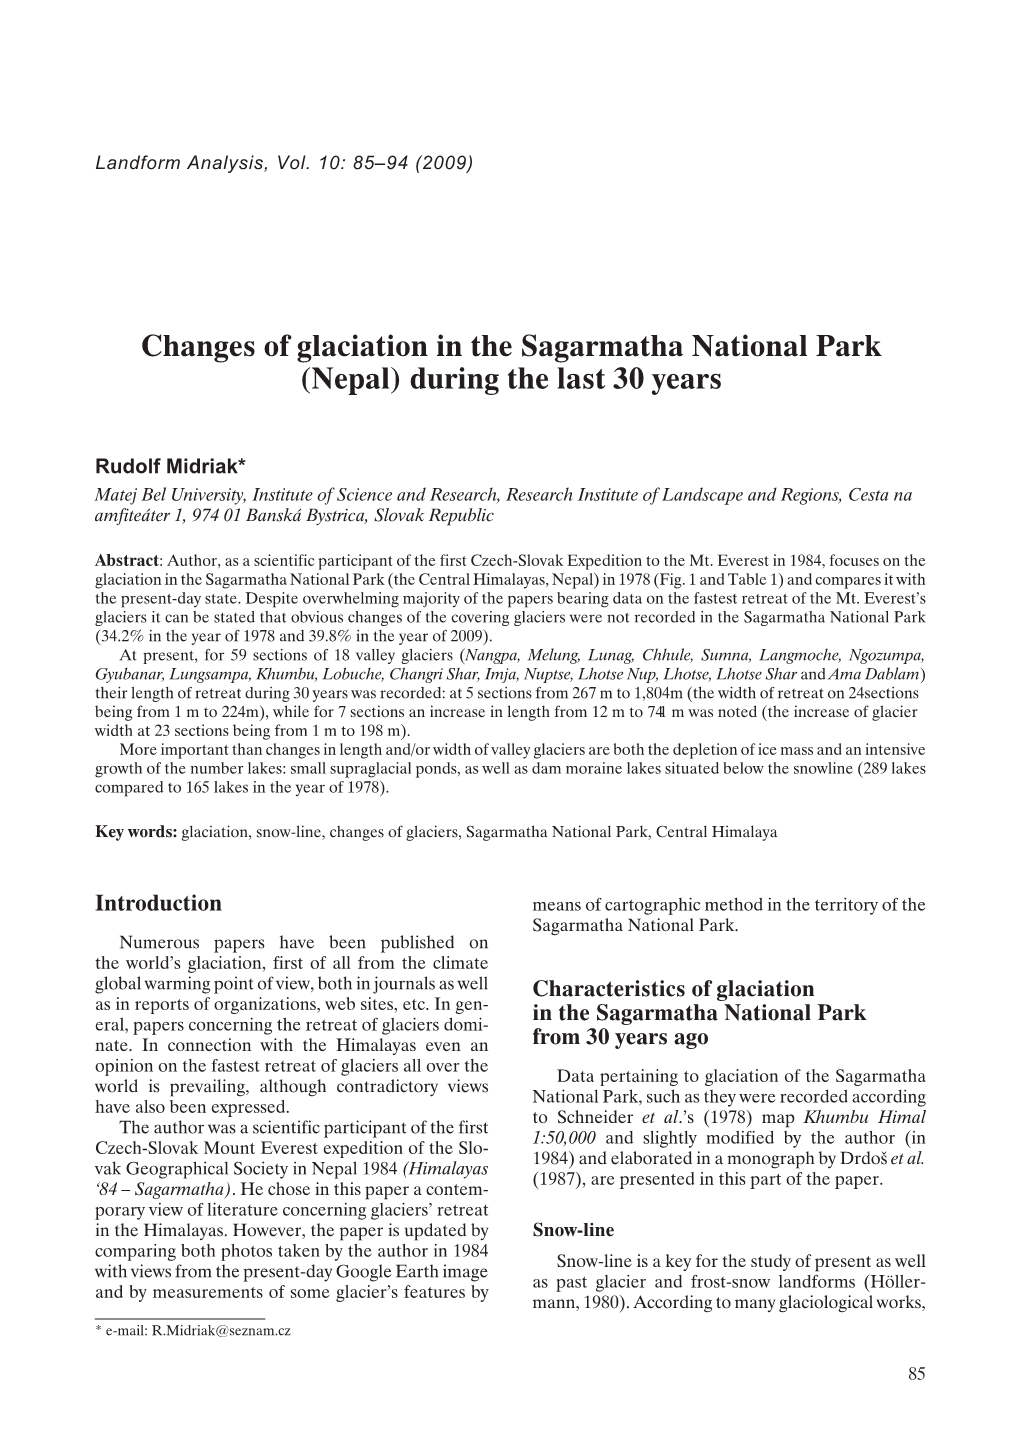 Changes of Glaciation in the Sagarmatha National Park (Nepal) During the Last 30 Years